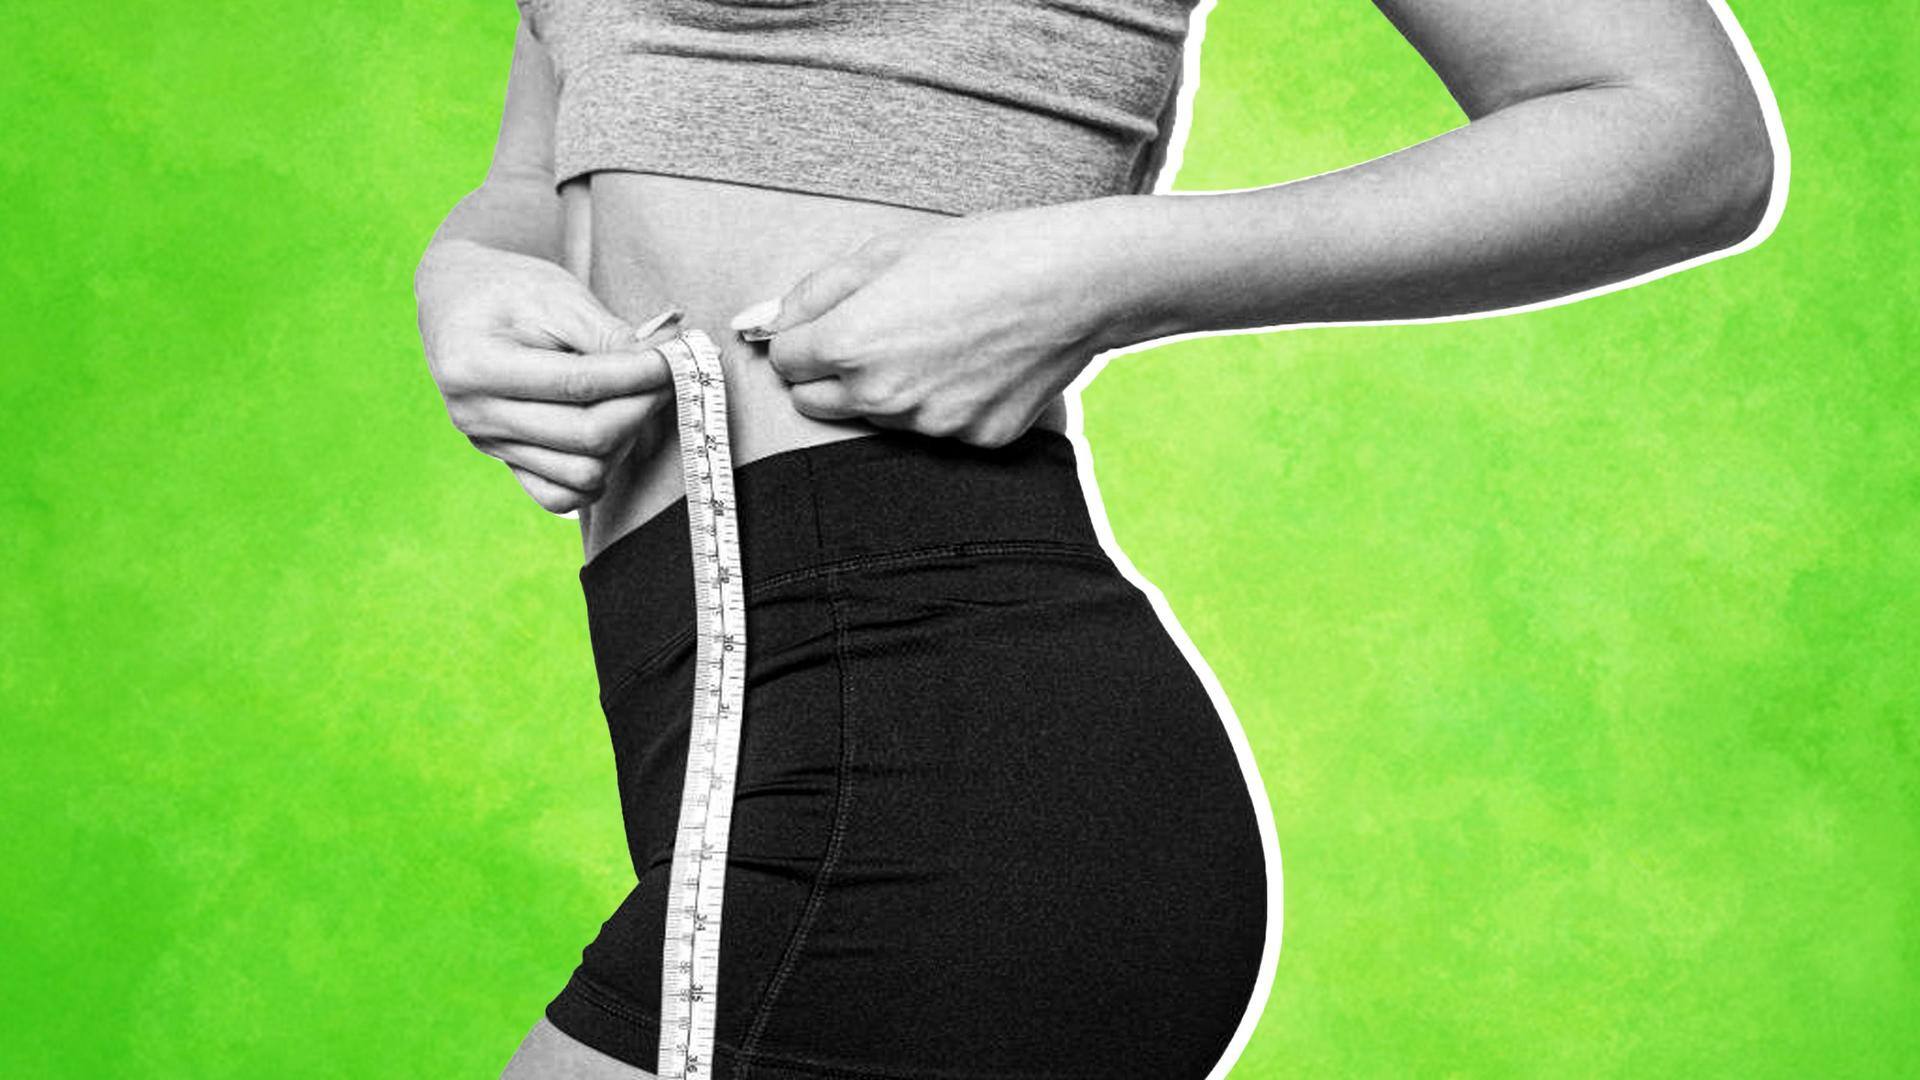 Calorie deficit: The only metric to track when losing weight